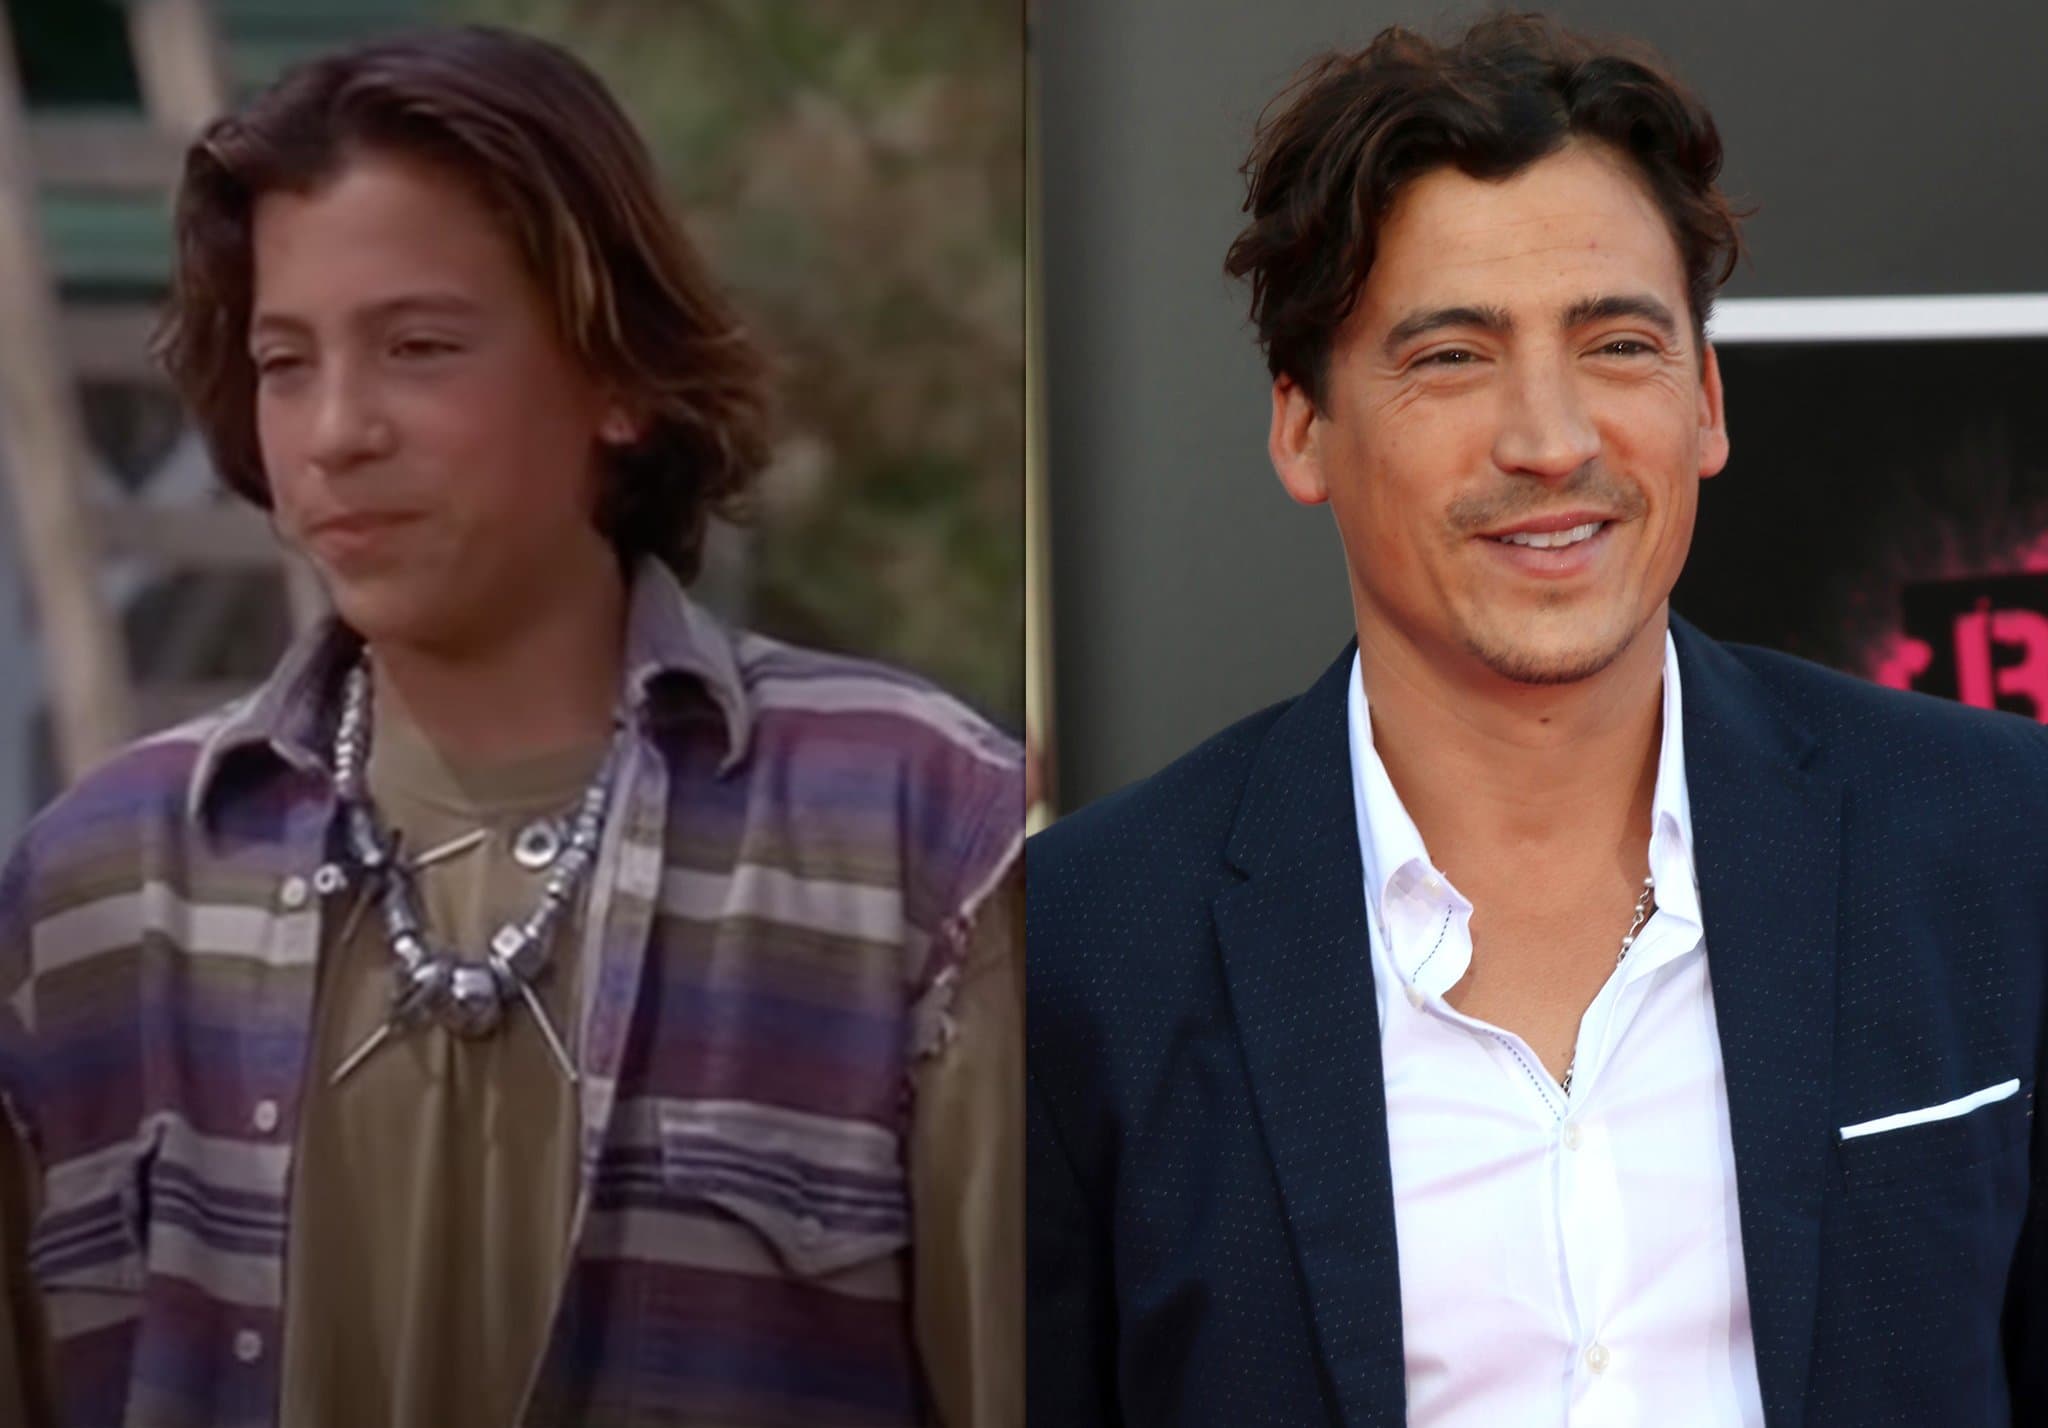 While he's now a religious leader, Andrew Keegan still stars in several series and films, with the crime thriller Adverse being his latest movie